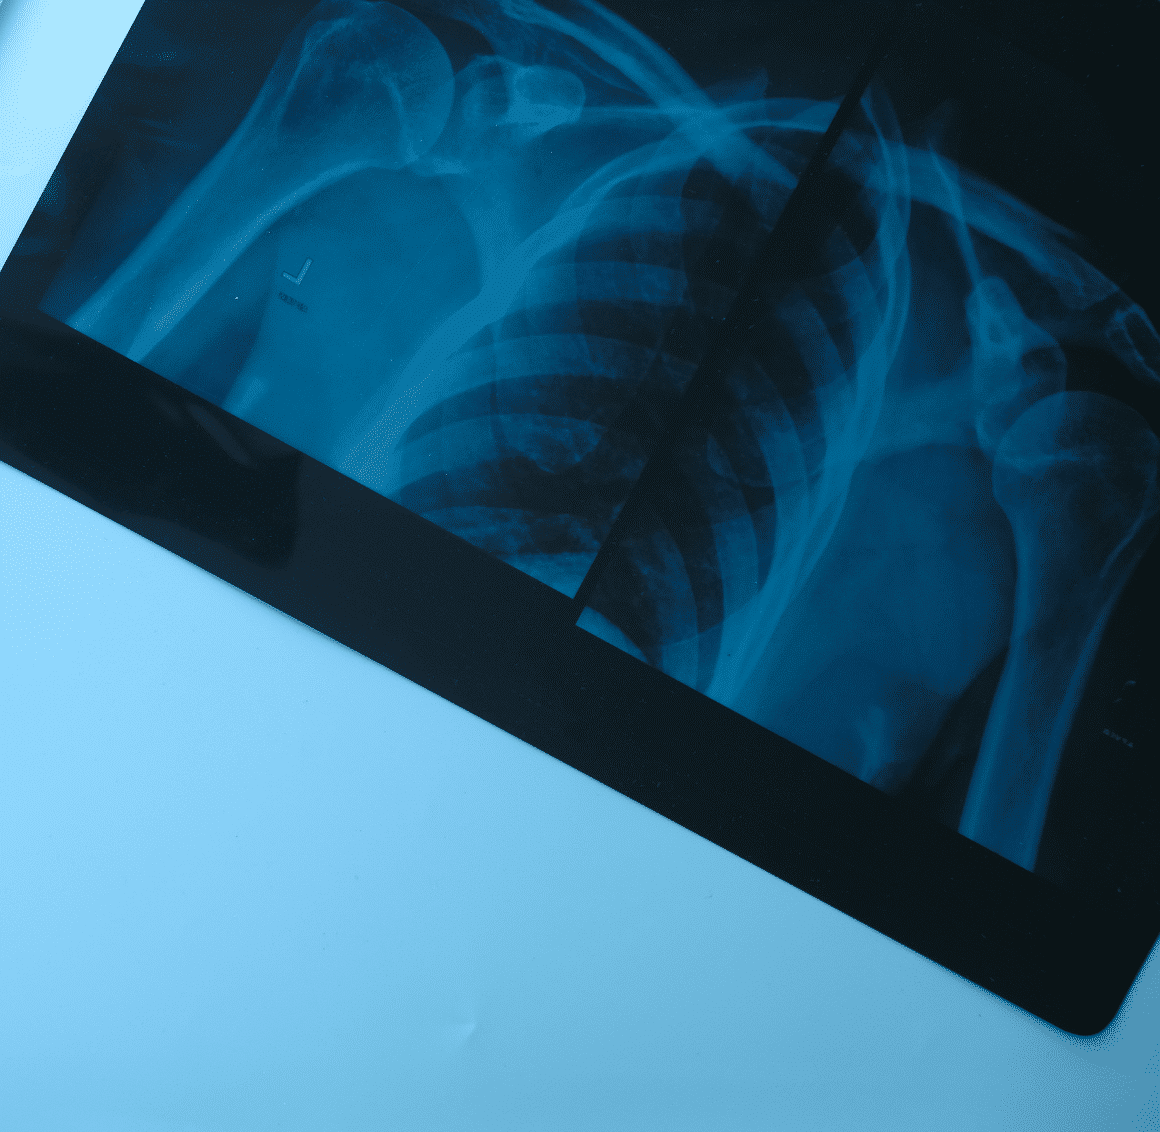 x ray image for banner photo on personal injury page